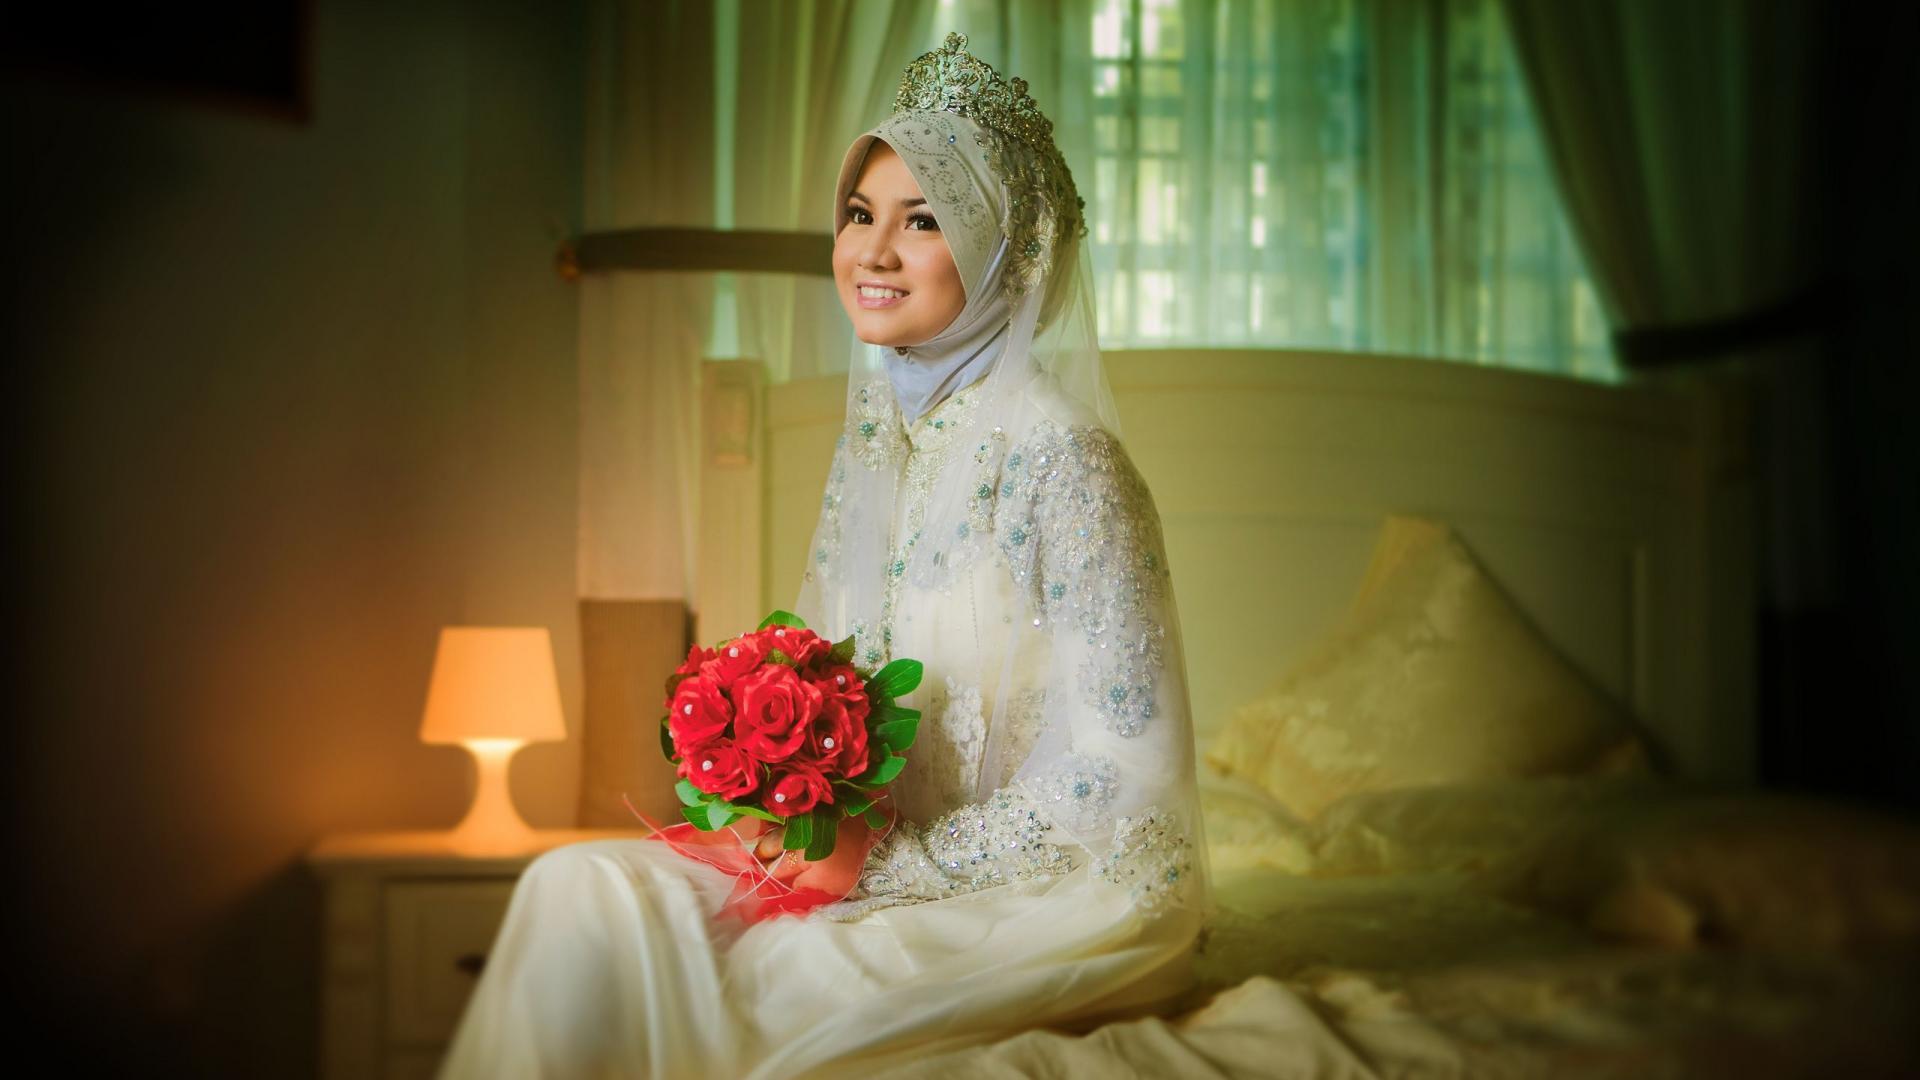 Everything You Need to Know About Nikah | Nest Matrimony